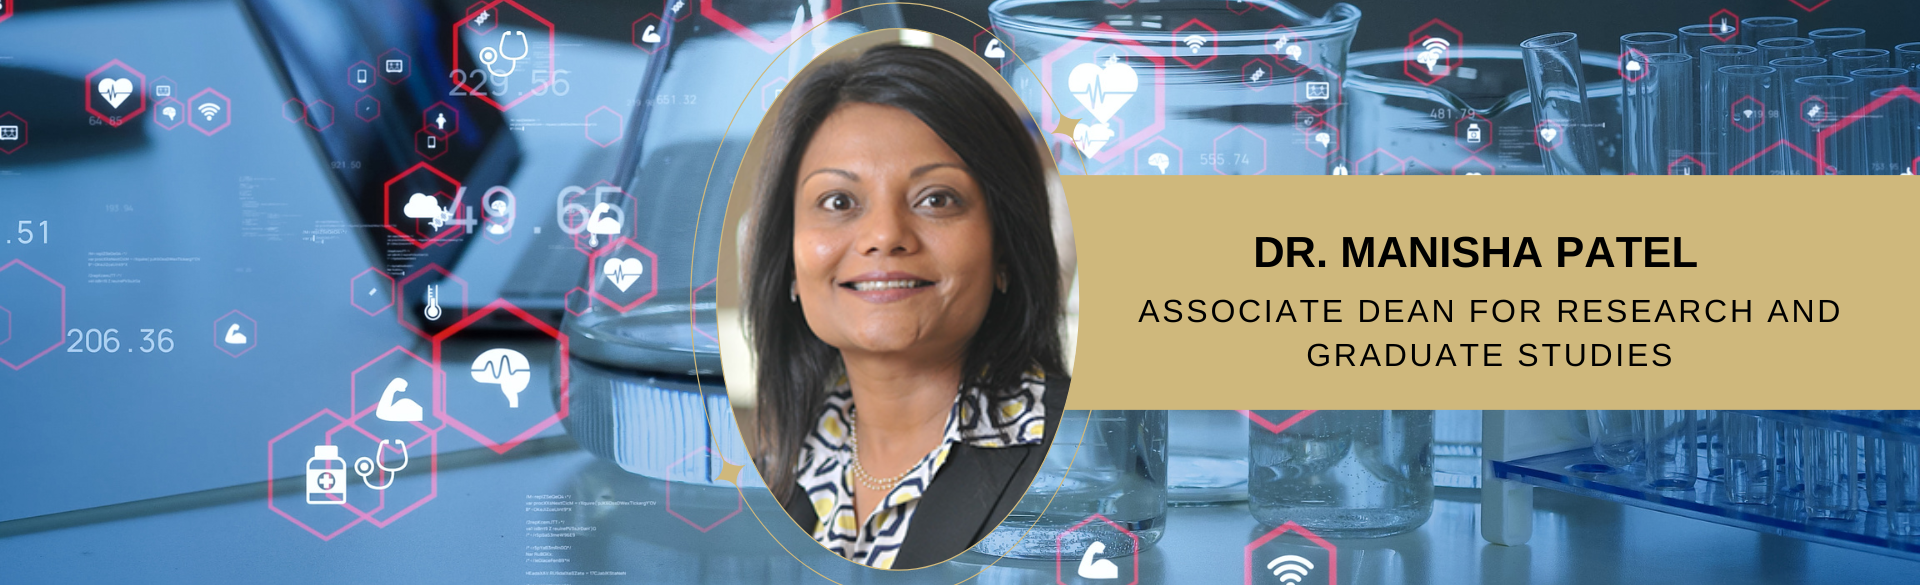 Dr. Manisha Patel steps into role of Associate Dean for Research and Graduate Studies